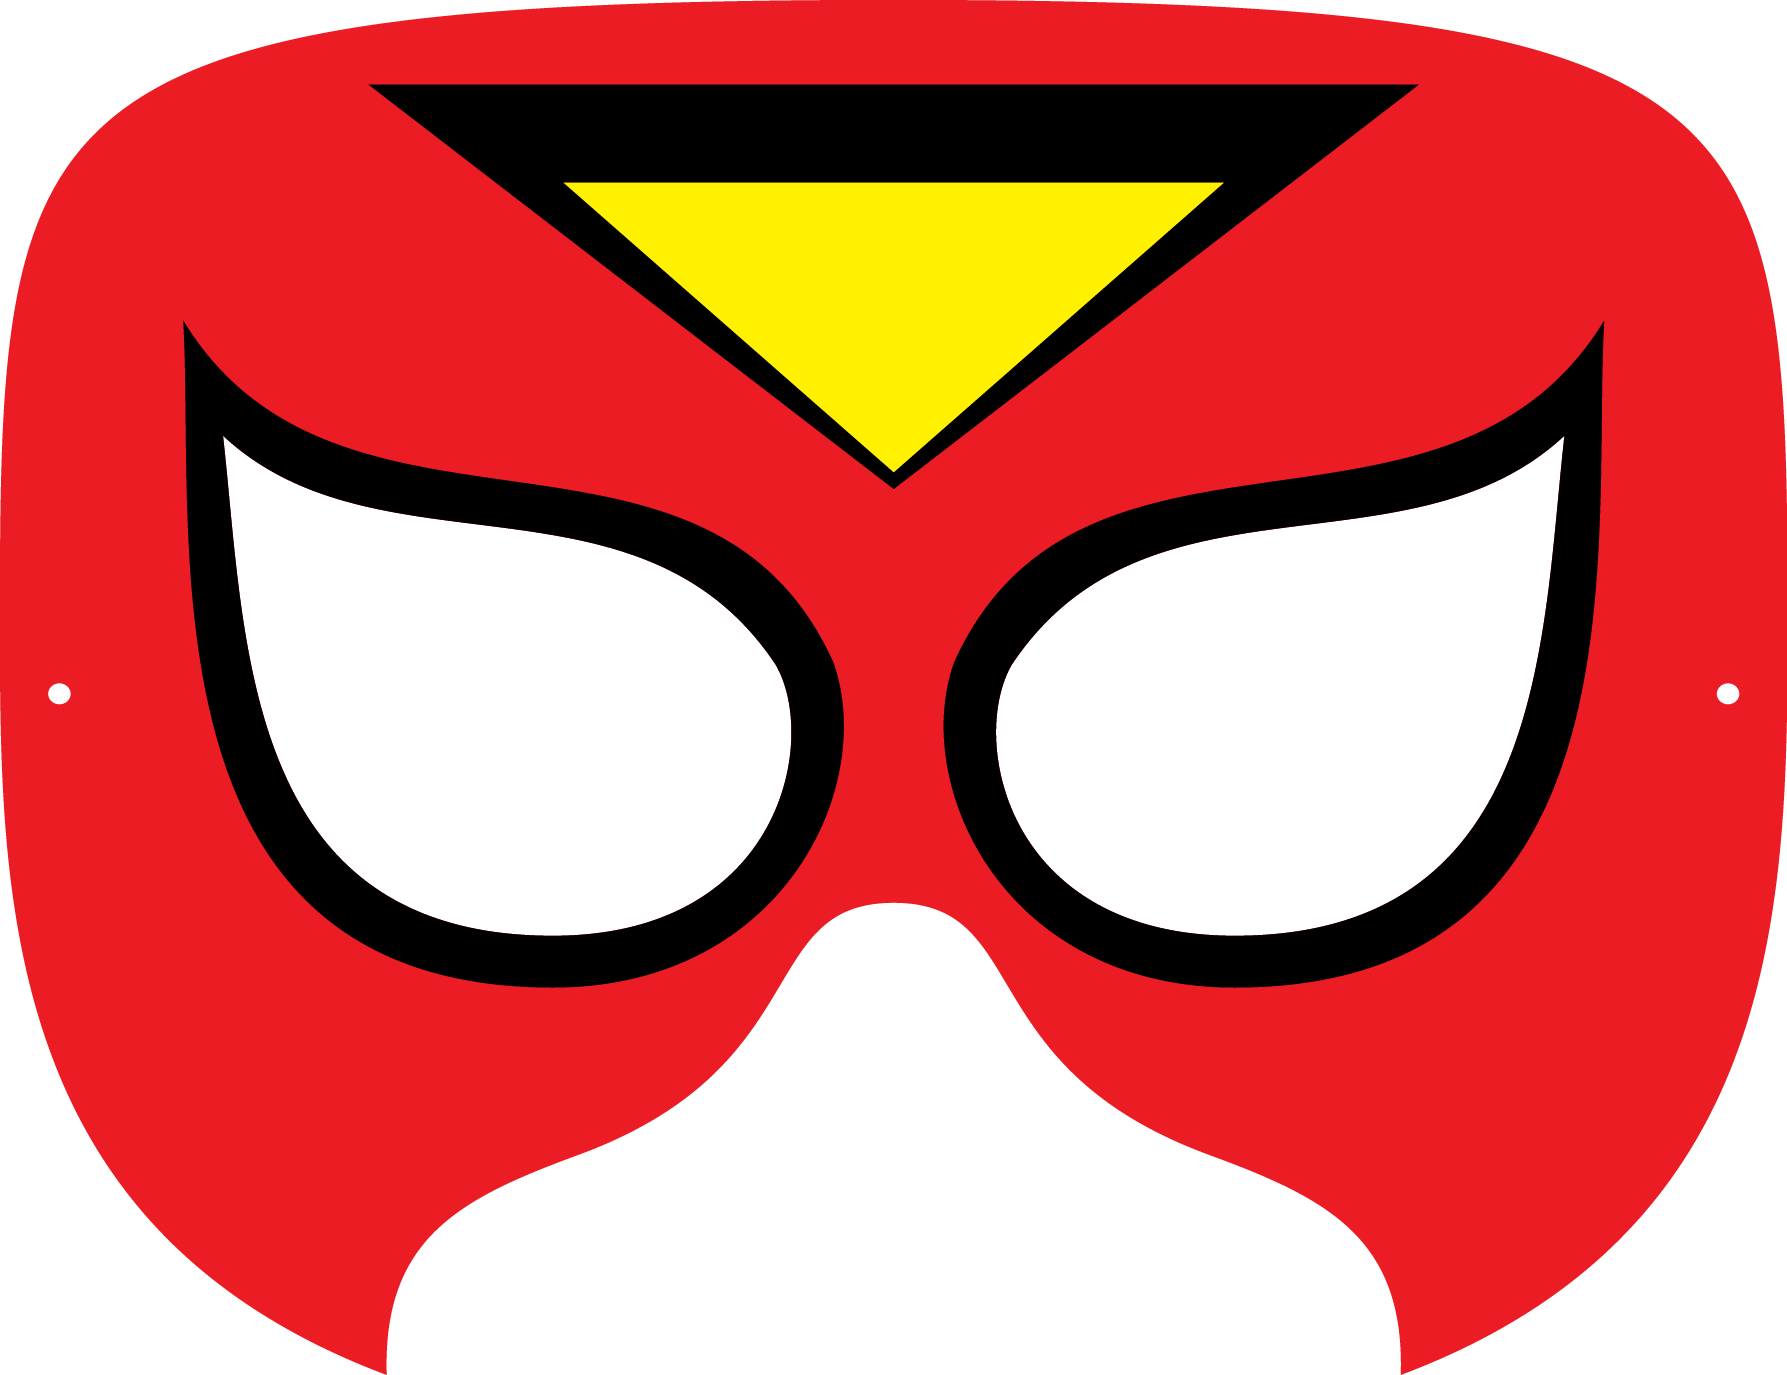 Superhero Mask Template | Free download on ClipArtMag